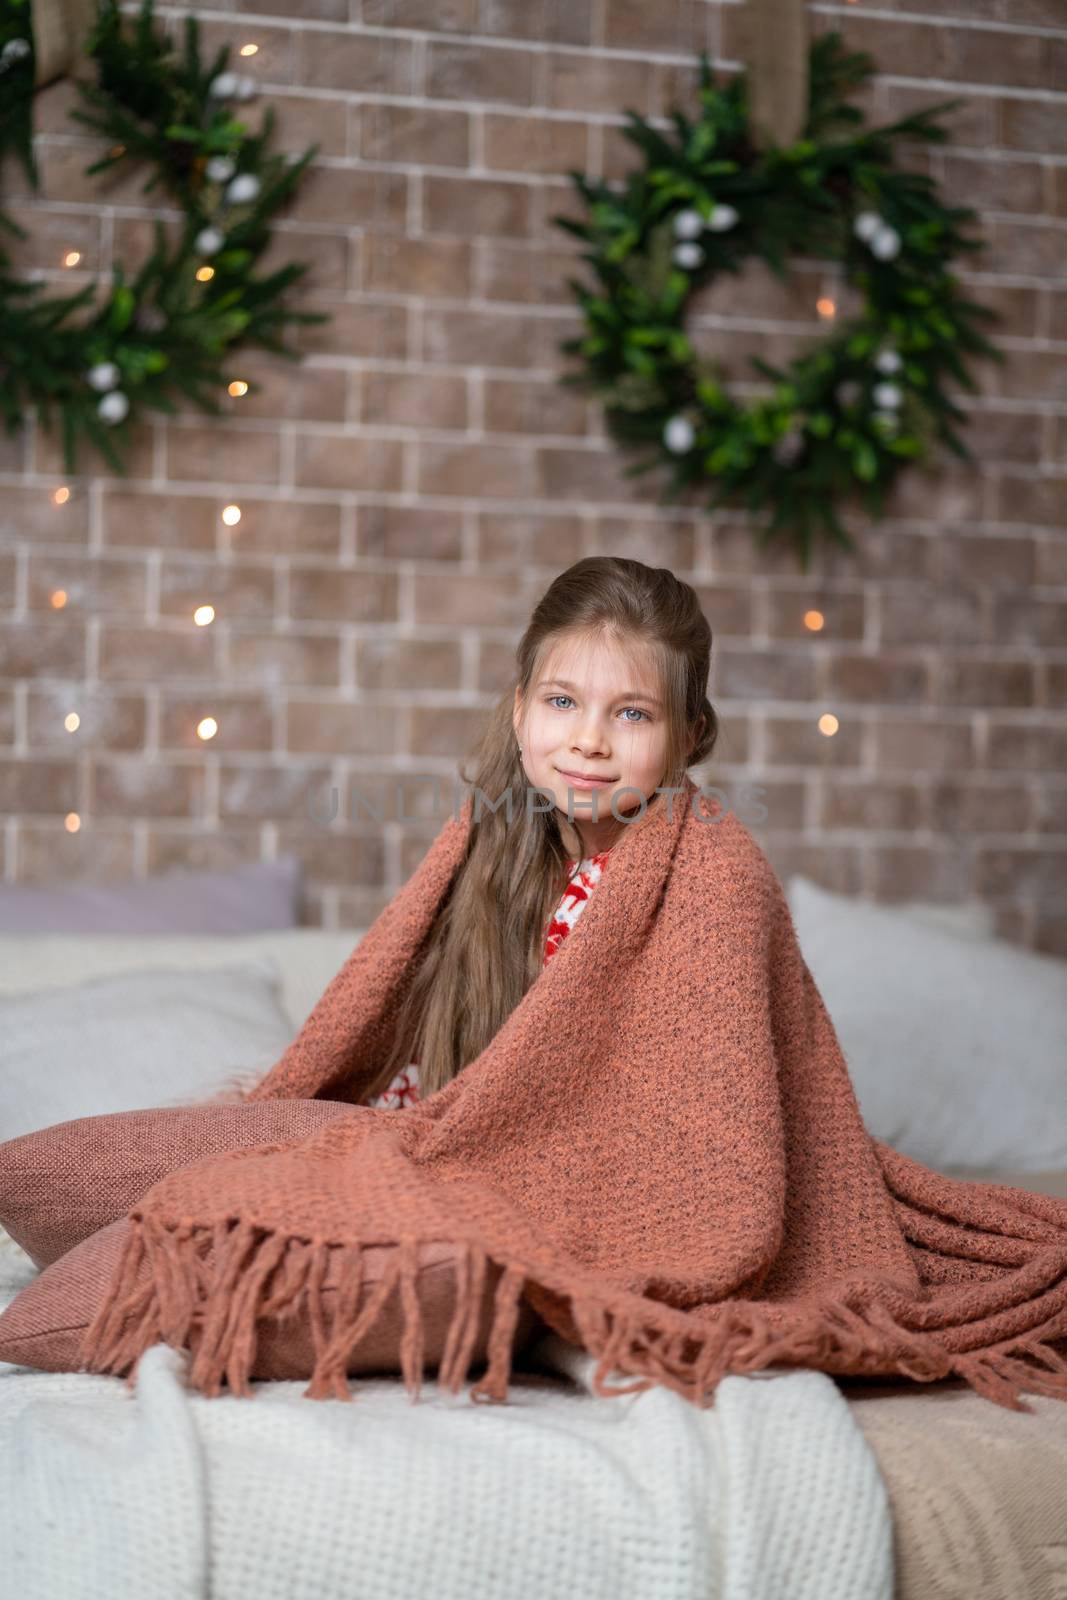 A little girl keeps warm under a cozy knitted blanket.